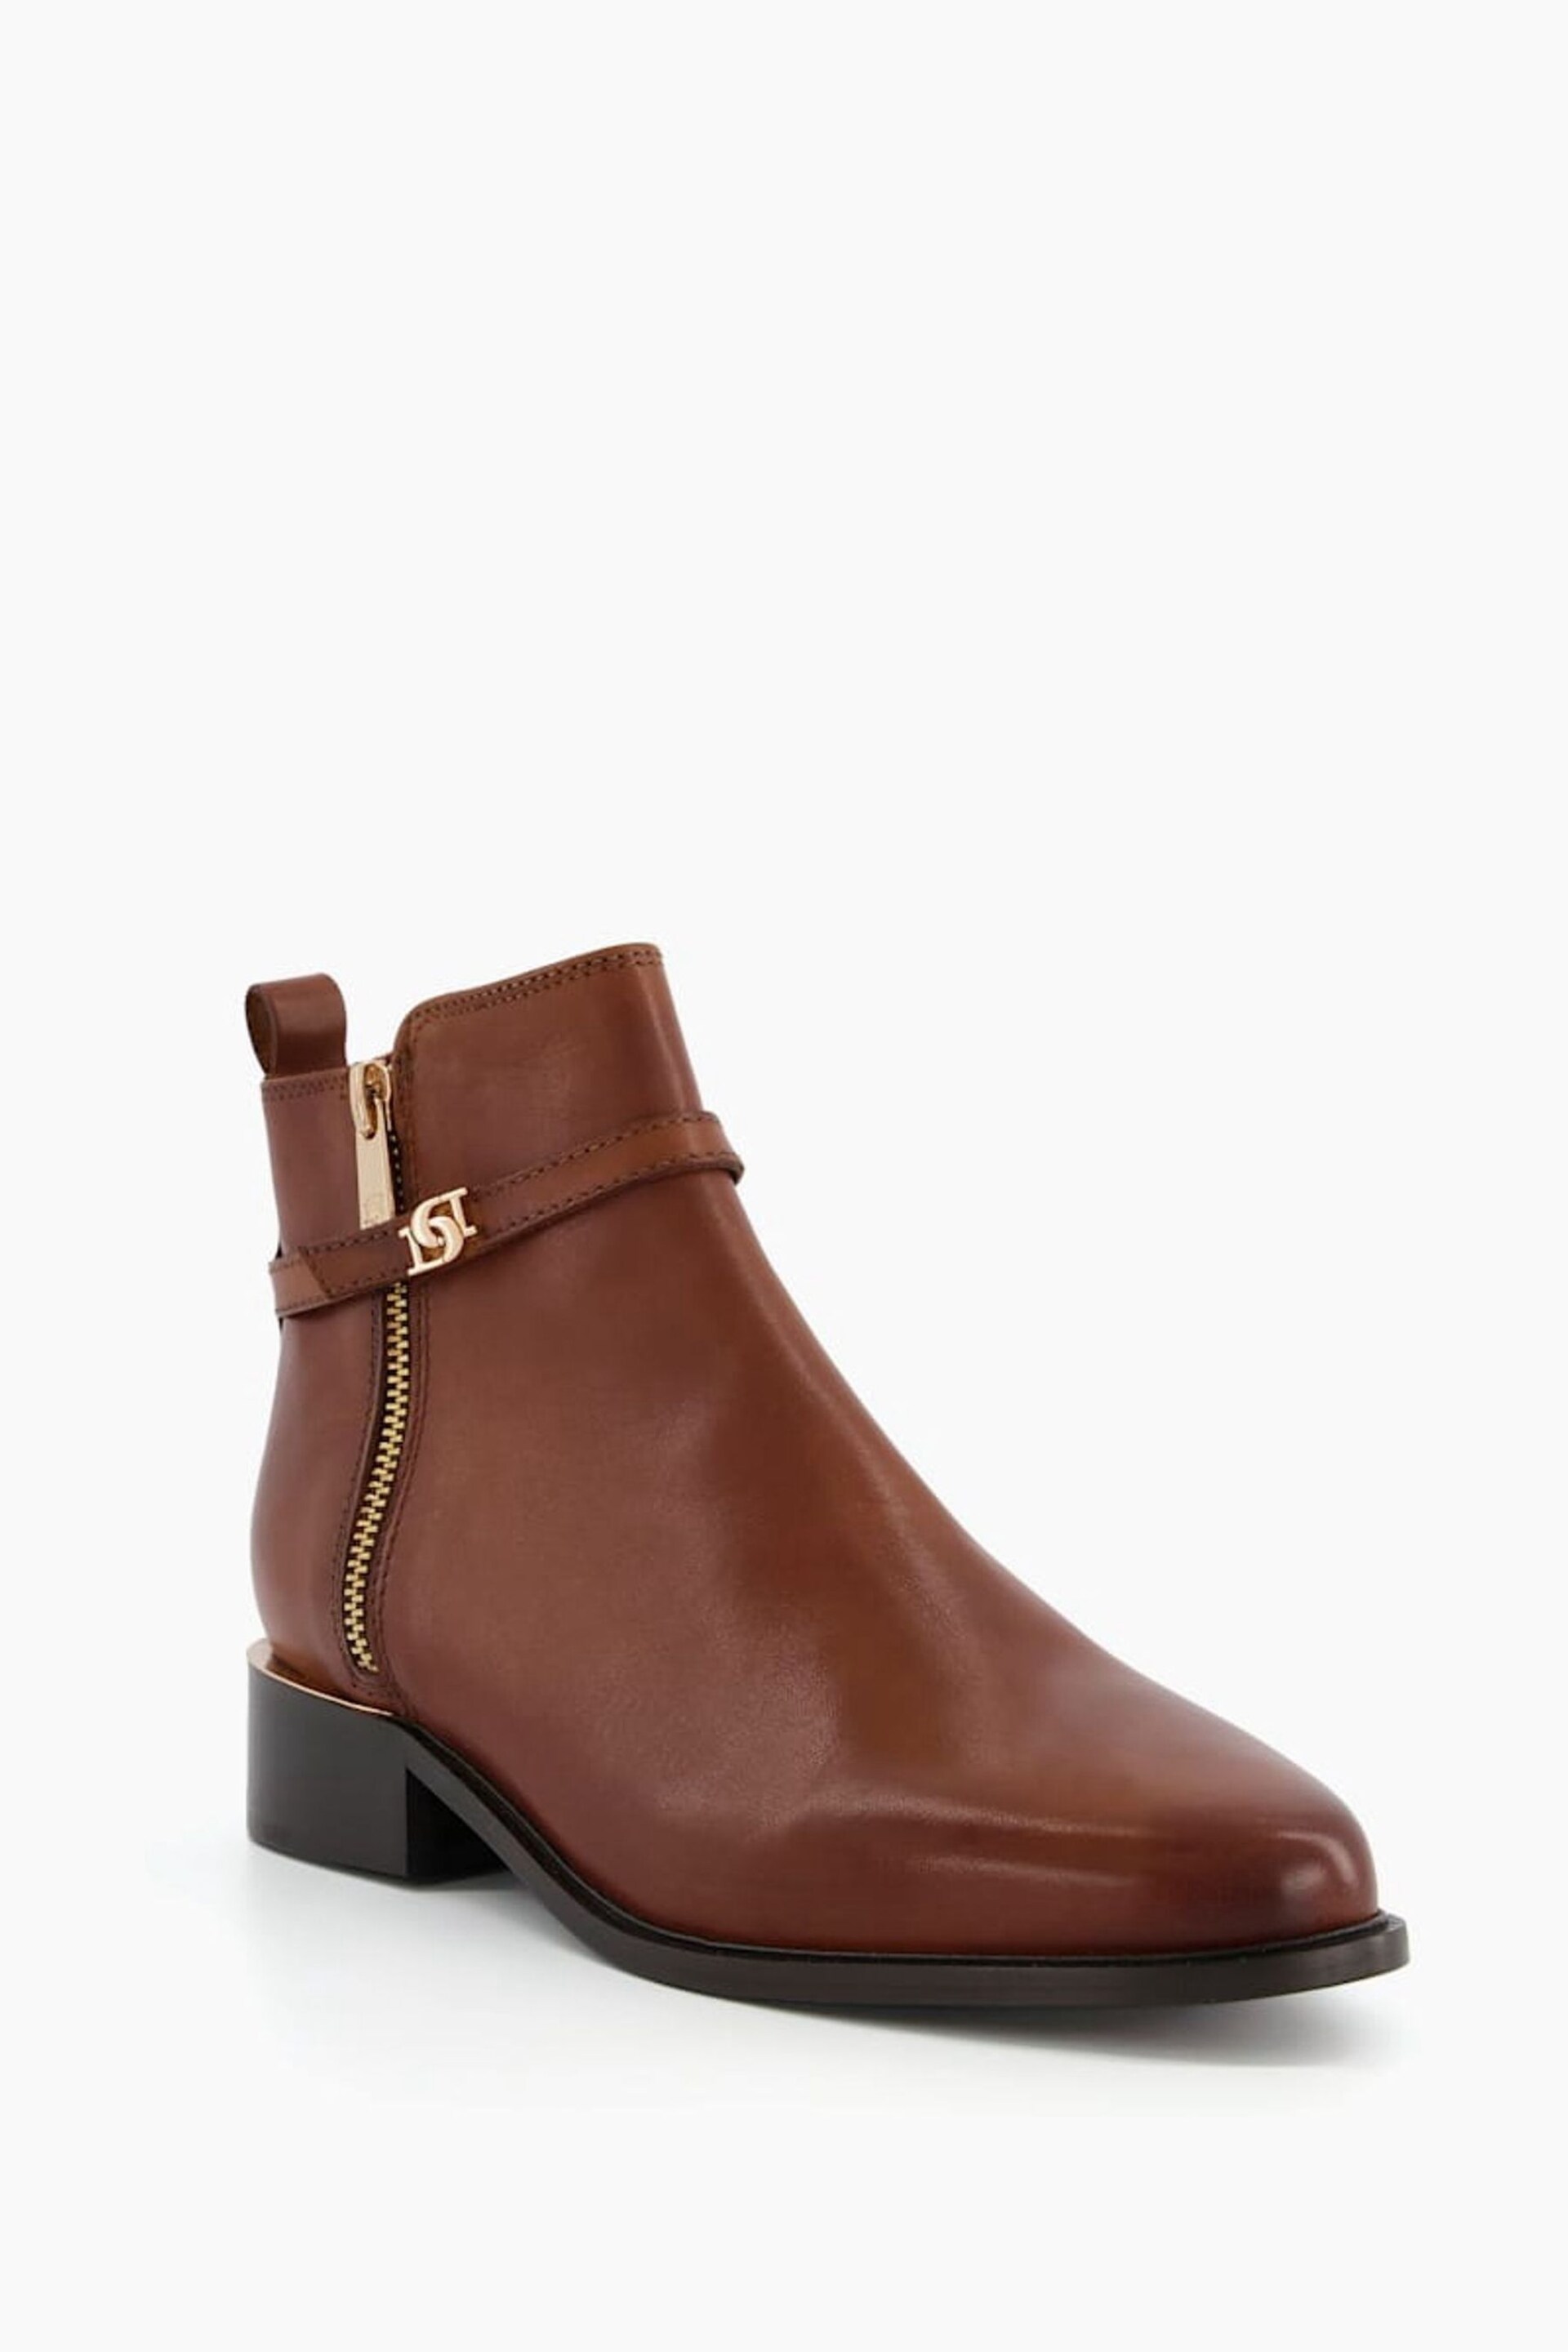 Dune London Brown Wide Fit Pap Buckle Trim Ankle Boots - Image 2 of 5